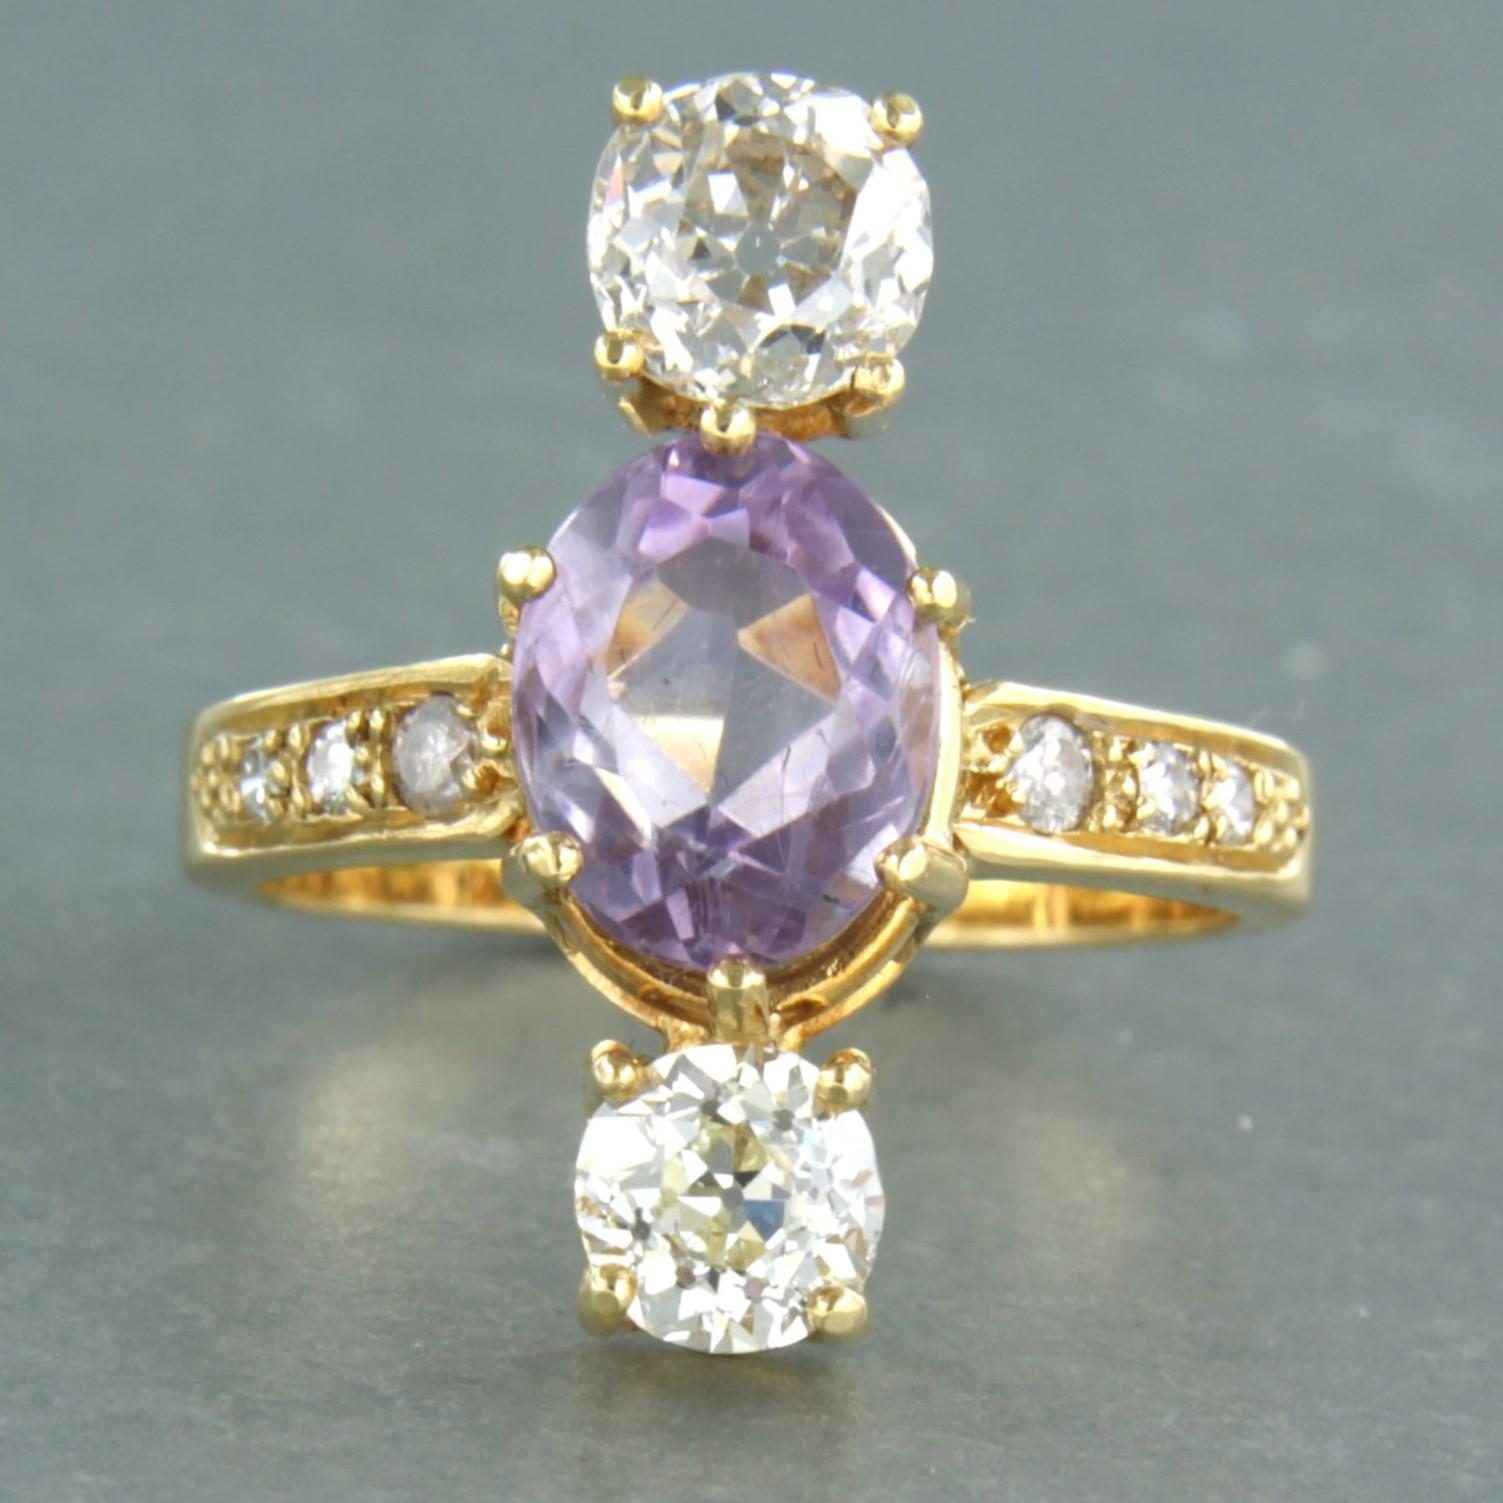 18k yellow gold ring set with amethyst and old mine cut diamonds. 1.40ct - ring size U.S. 6.5 - EU. 17(53)

detailed description:

the top of the ring is 2.0 cm wide and 7.2 mm high

Ring size U.S. 6.5 - EU. 17(53), ring can be enlarged or reduced a